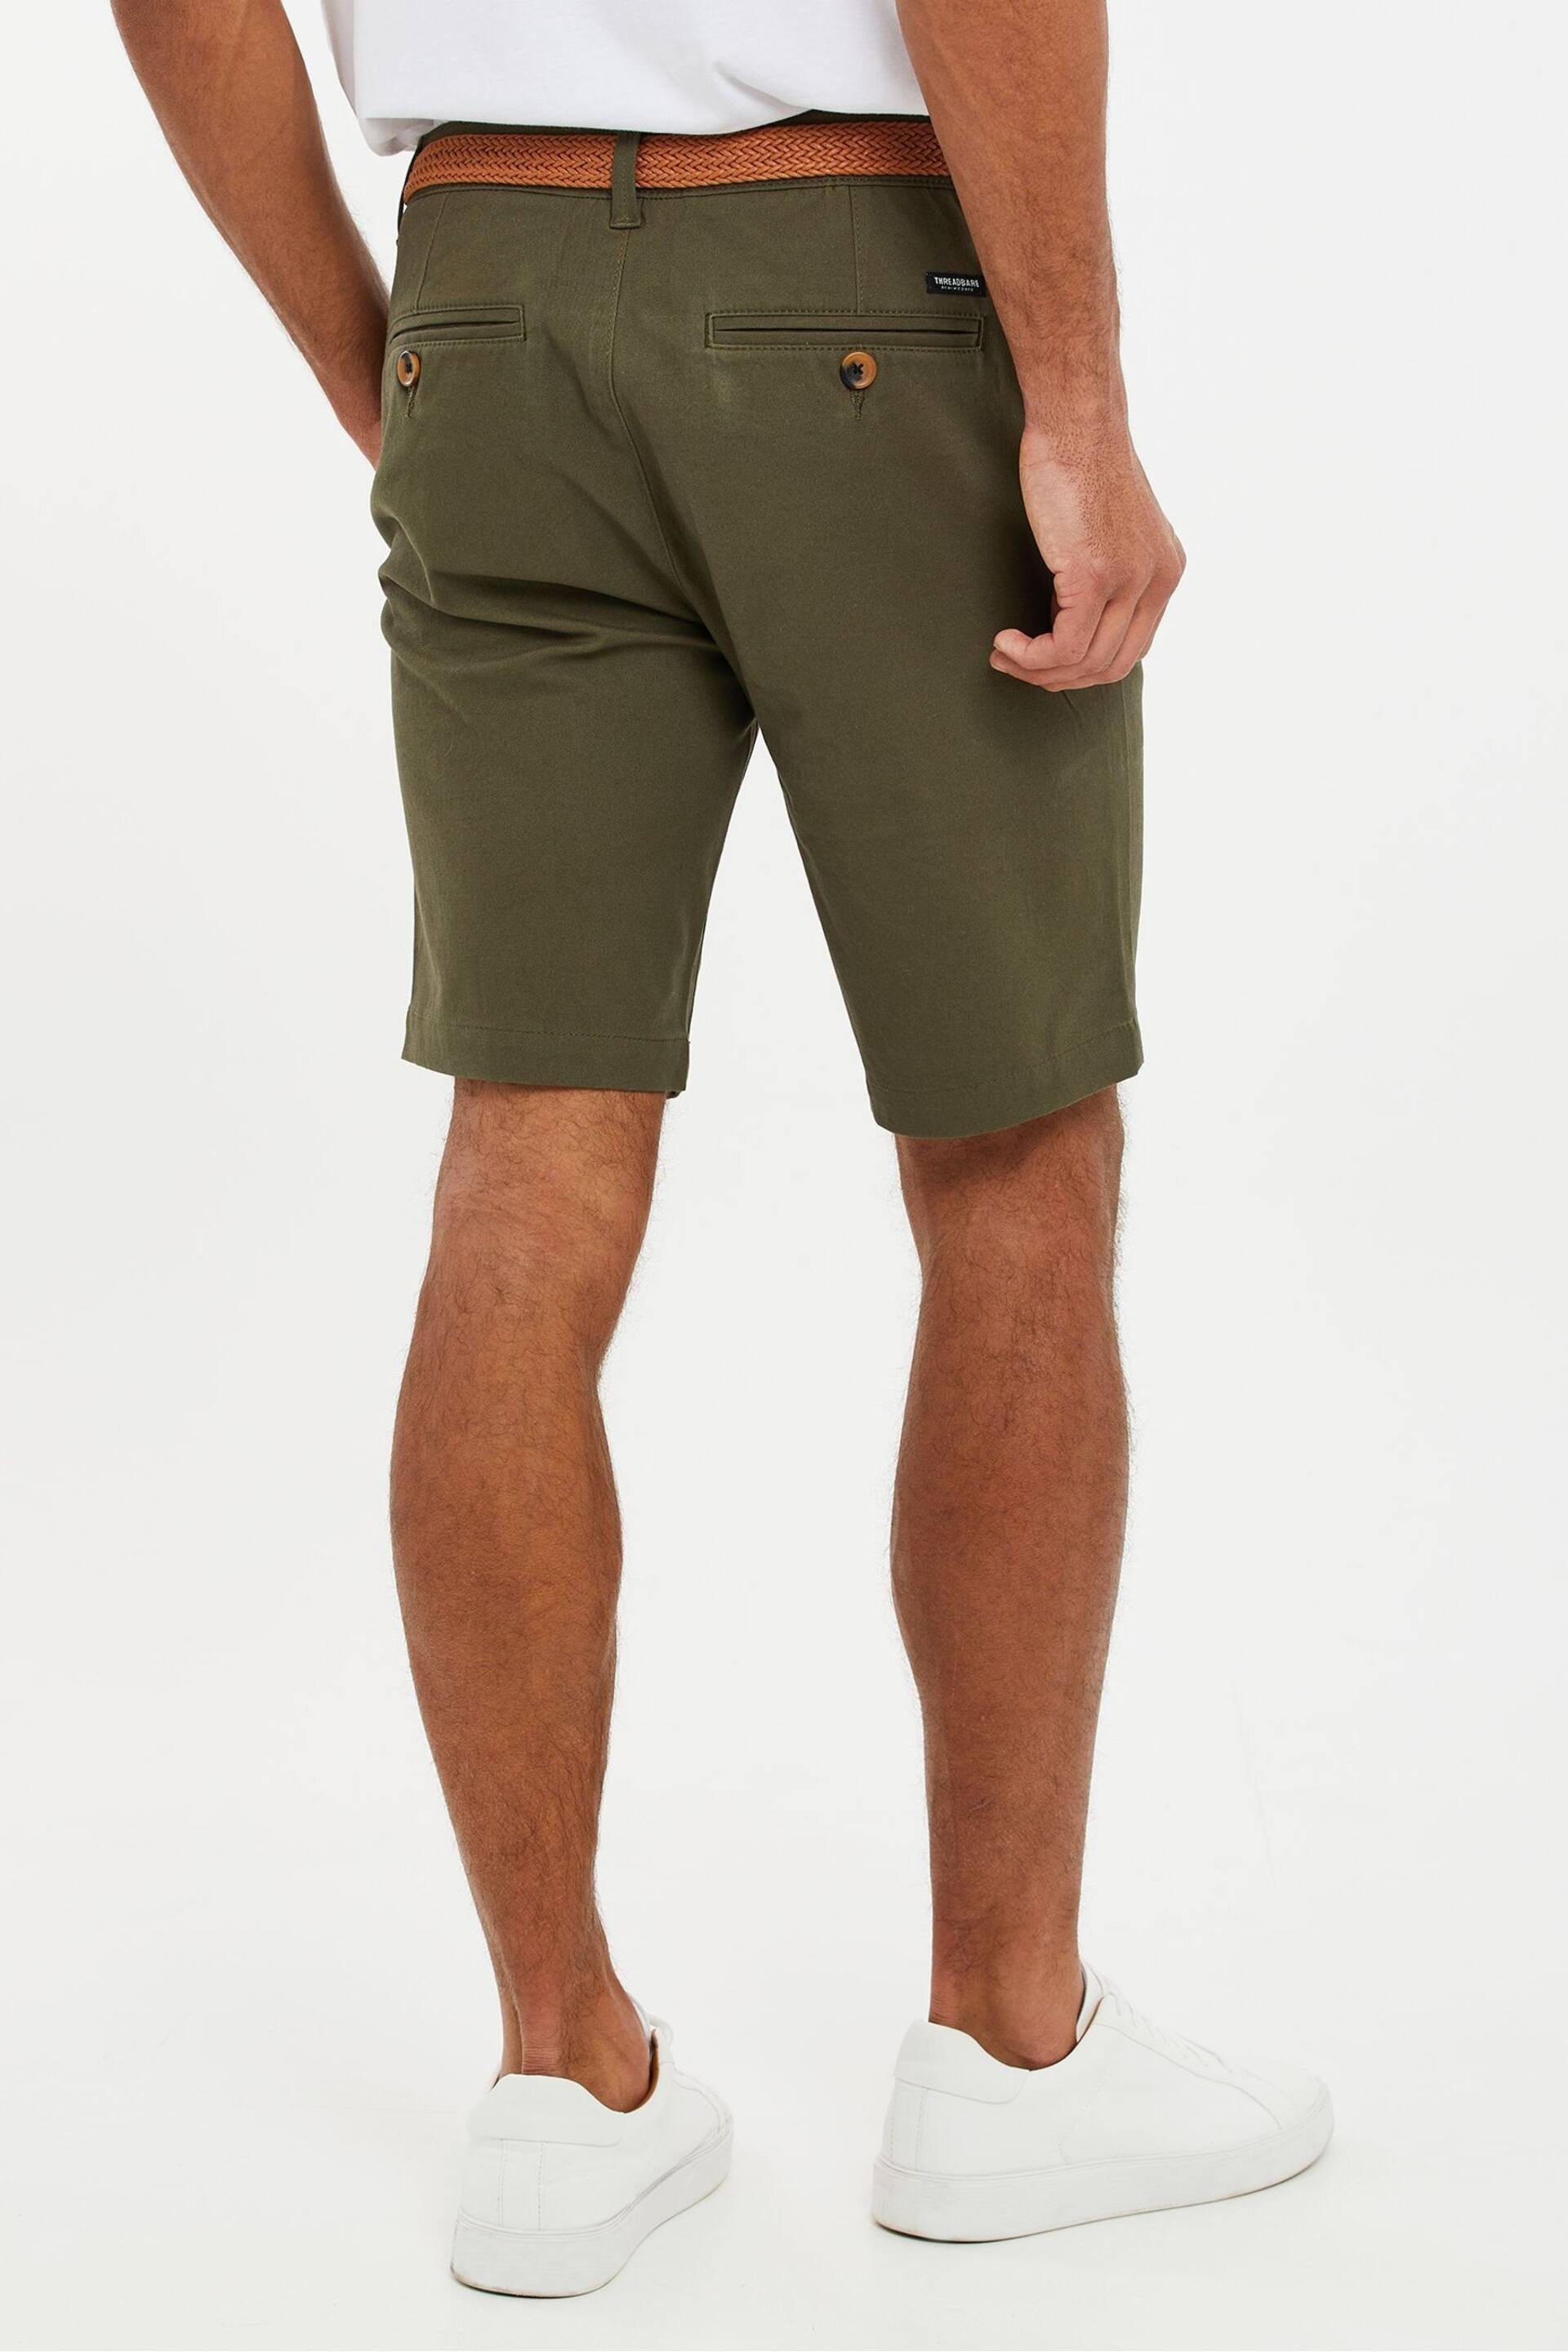 Threadbare Olive Green Cotton Stretch Turn-Up Chino Shorts with Woven Belt - Image 2 of 4